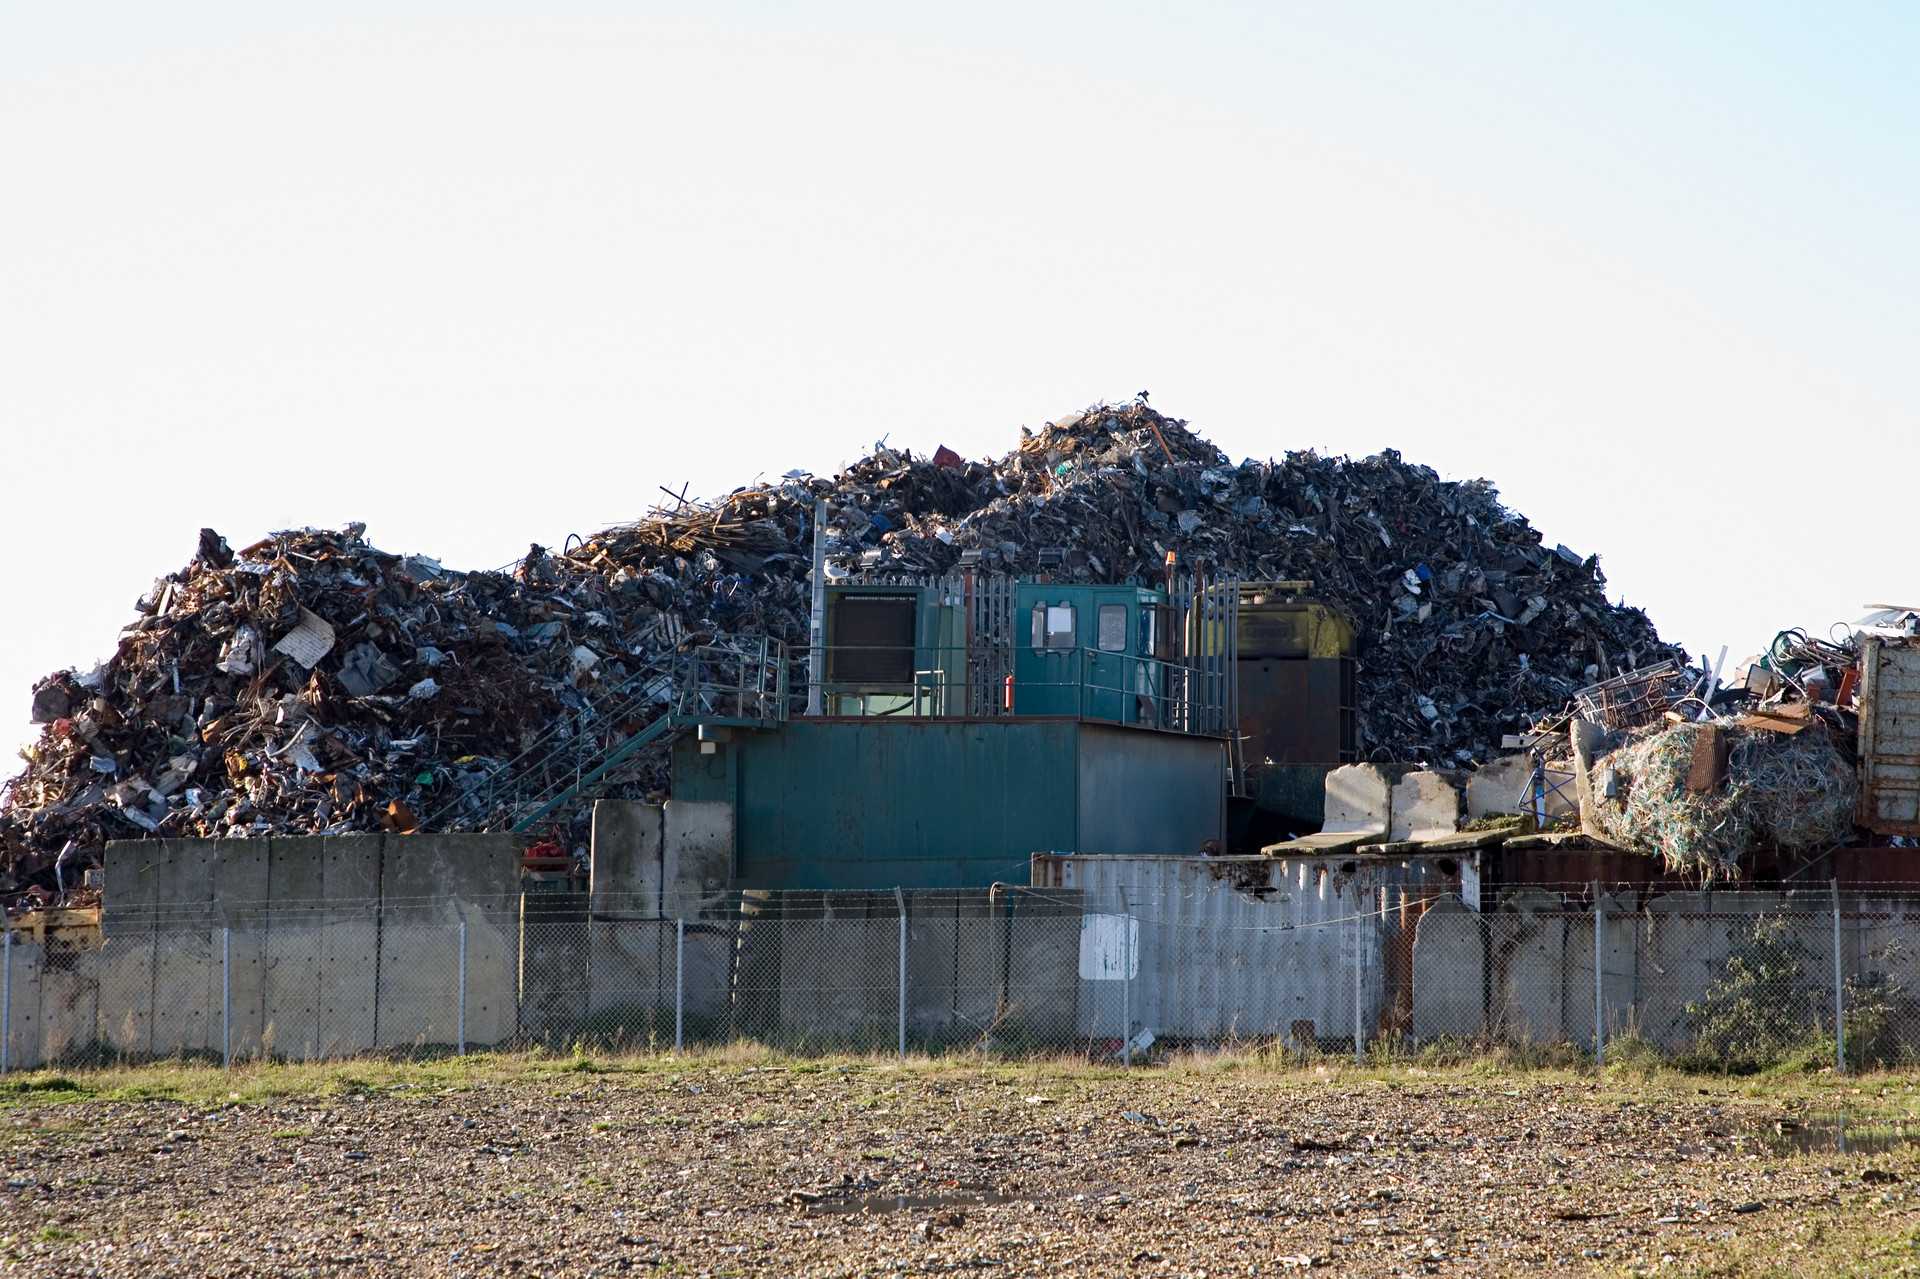 Sanitary landfill of domestic waste